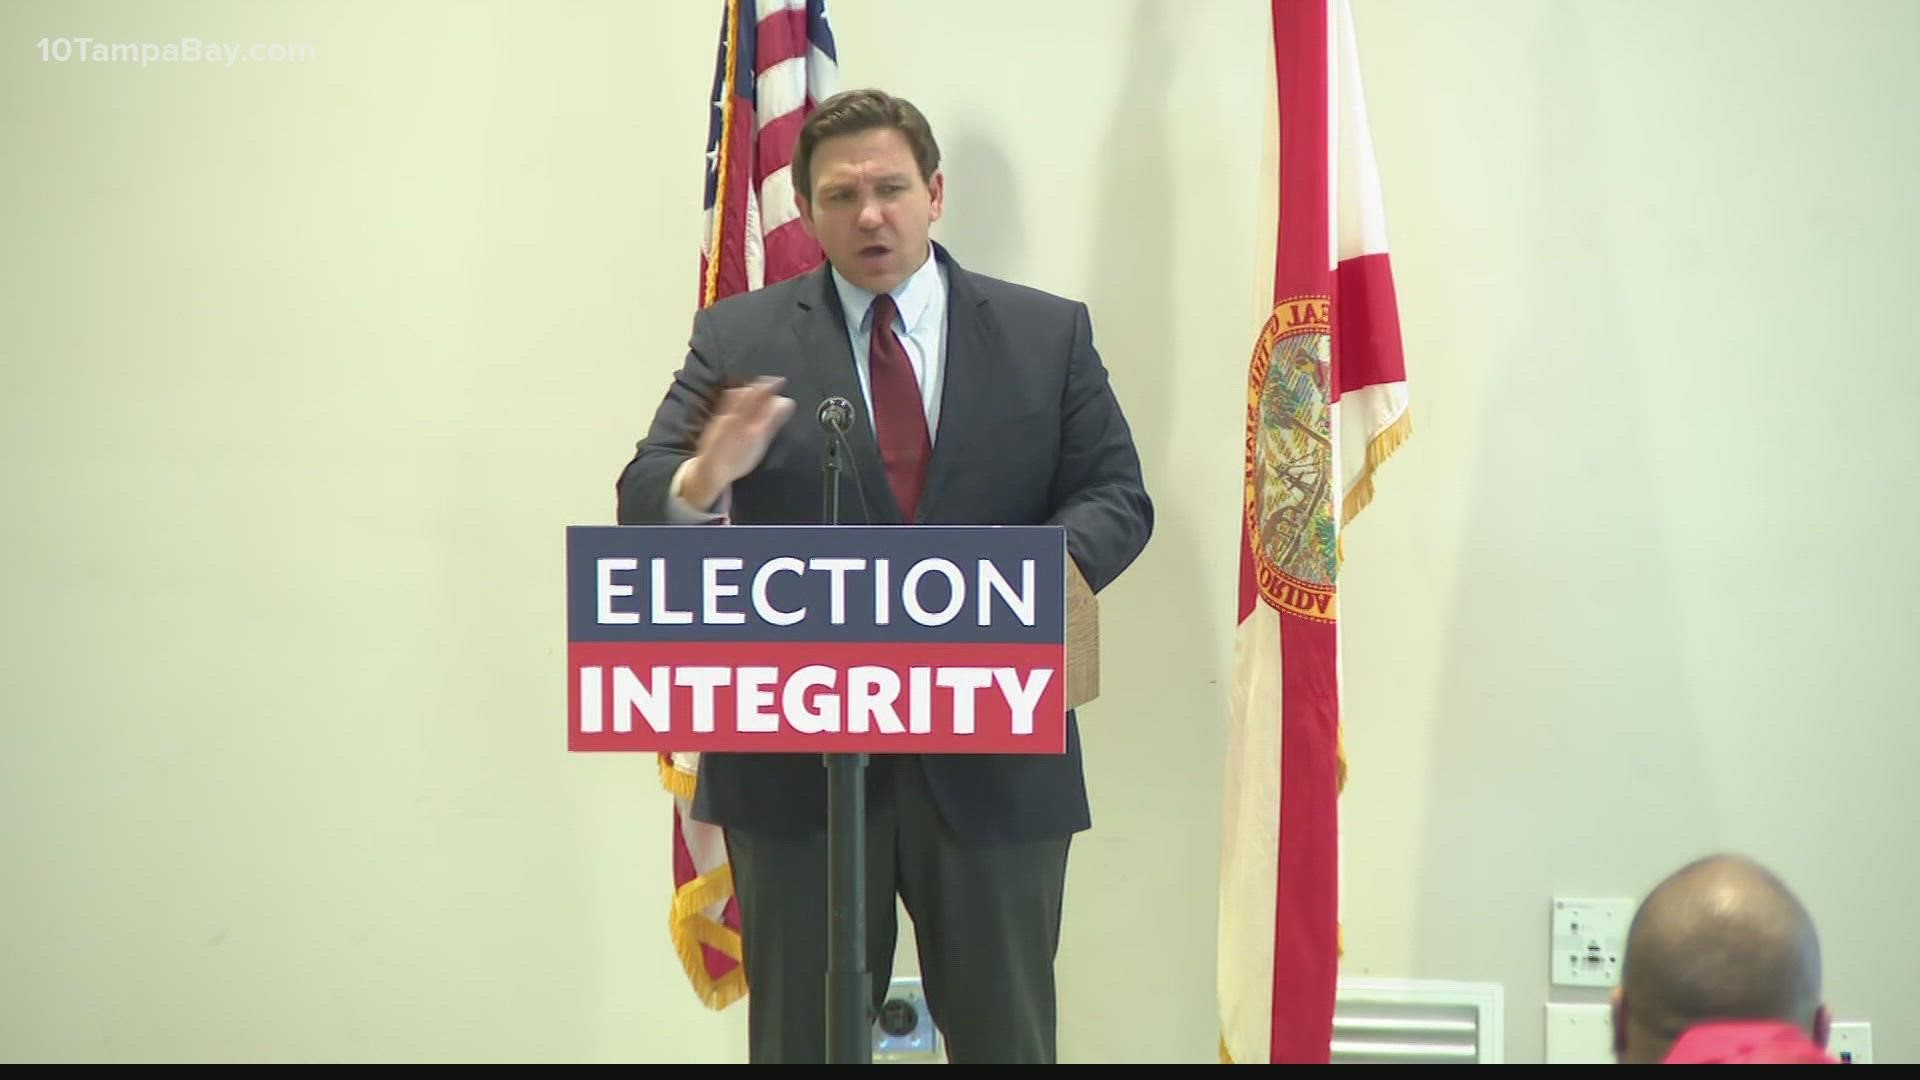 Florida recently passed an election restrictions law, but the governor says the state should be doing more.